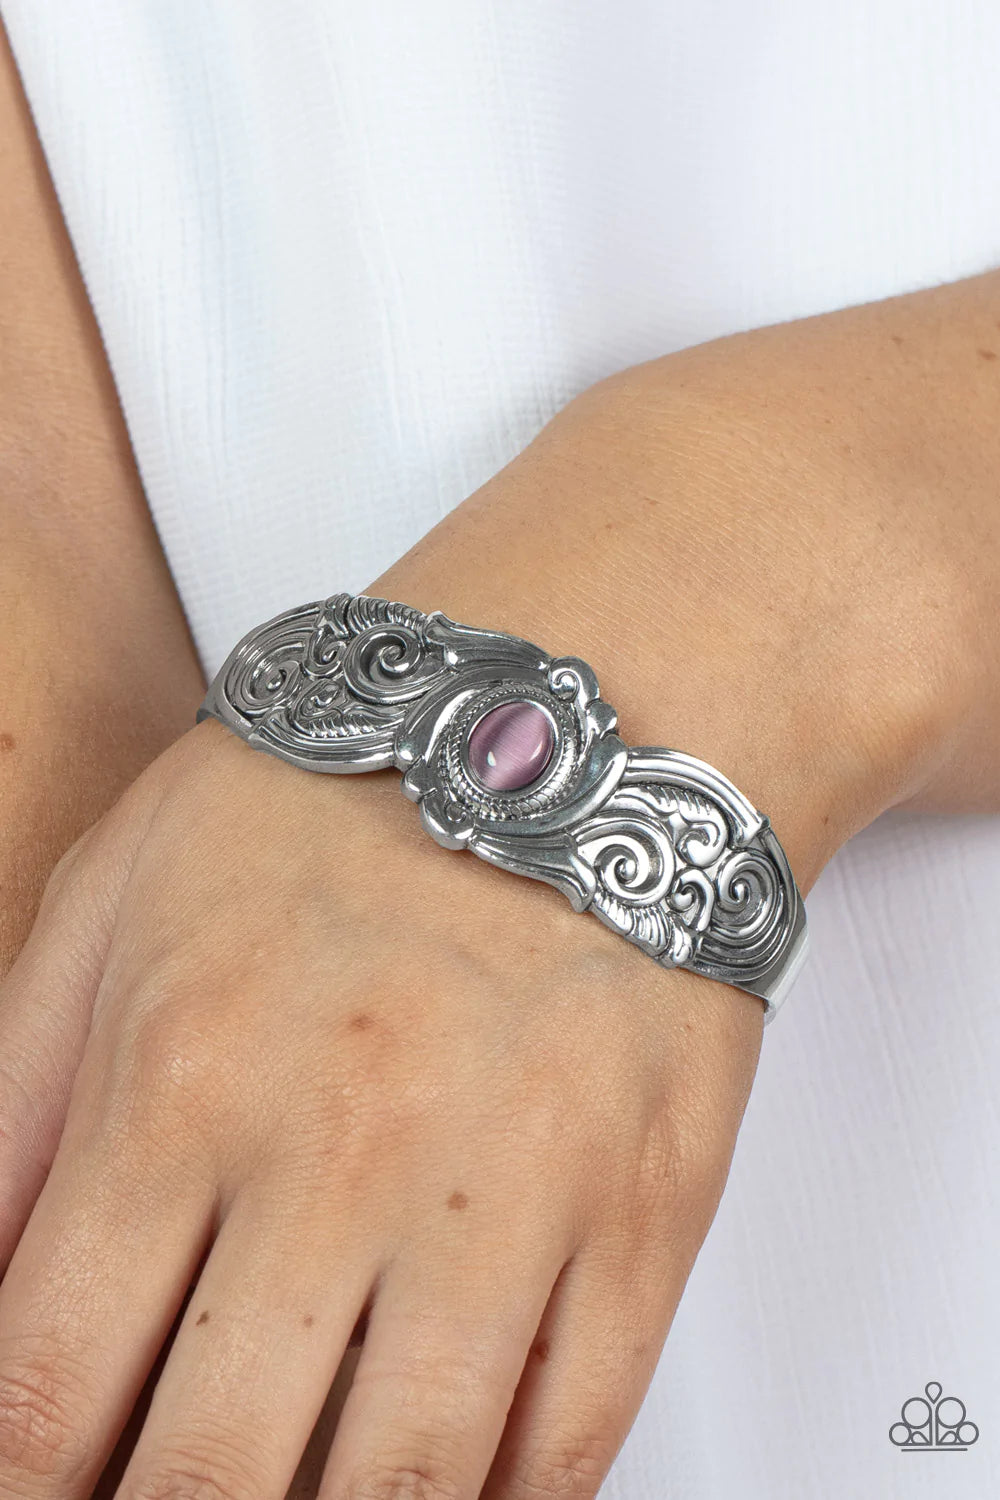 Paparazzi Accessories Glowing Enchantment - Purple Embossed in vine-like filigree patterns, an ornately scalloped silver cuff is adorned with a glassy purple cat's eye center for an ethereal finish. Sold as one individual bracelet. Bracelets